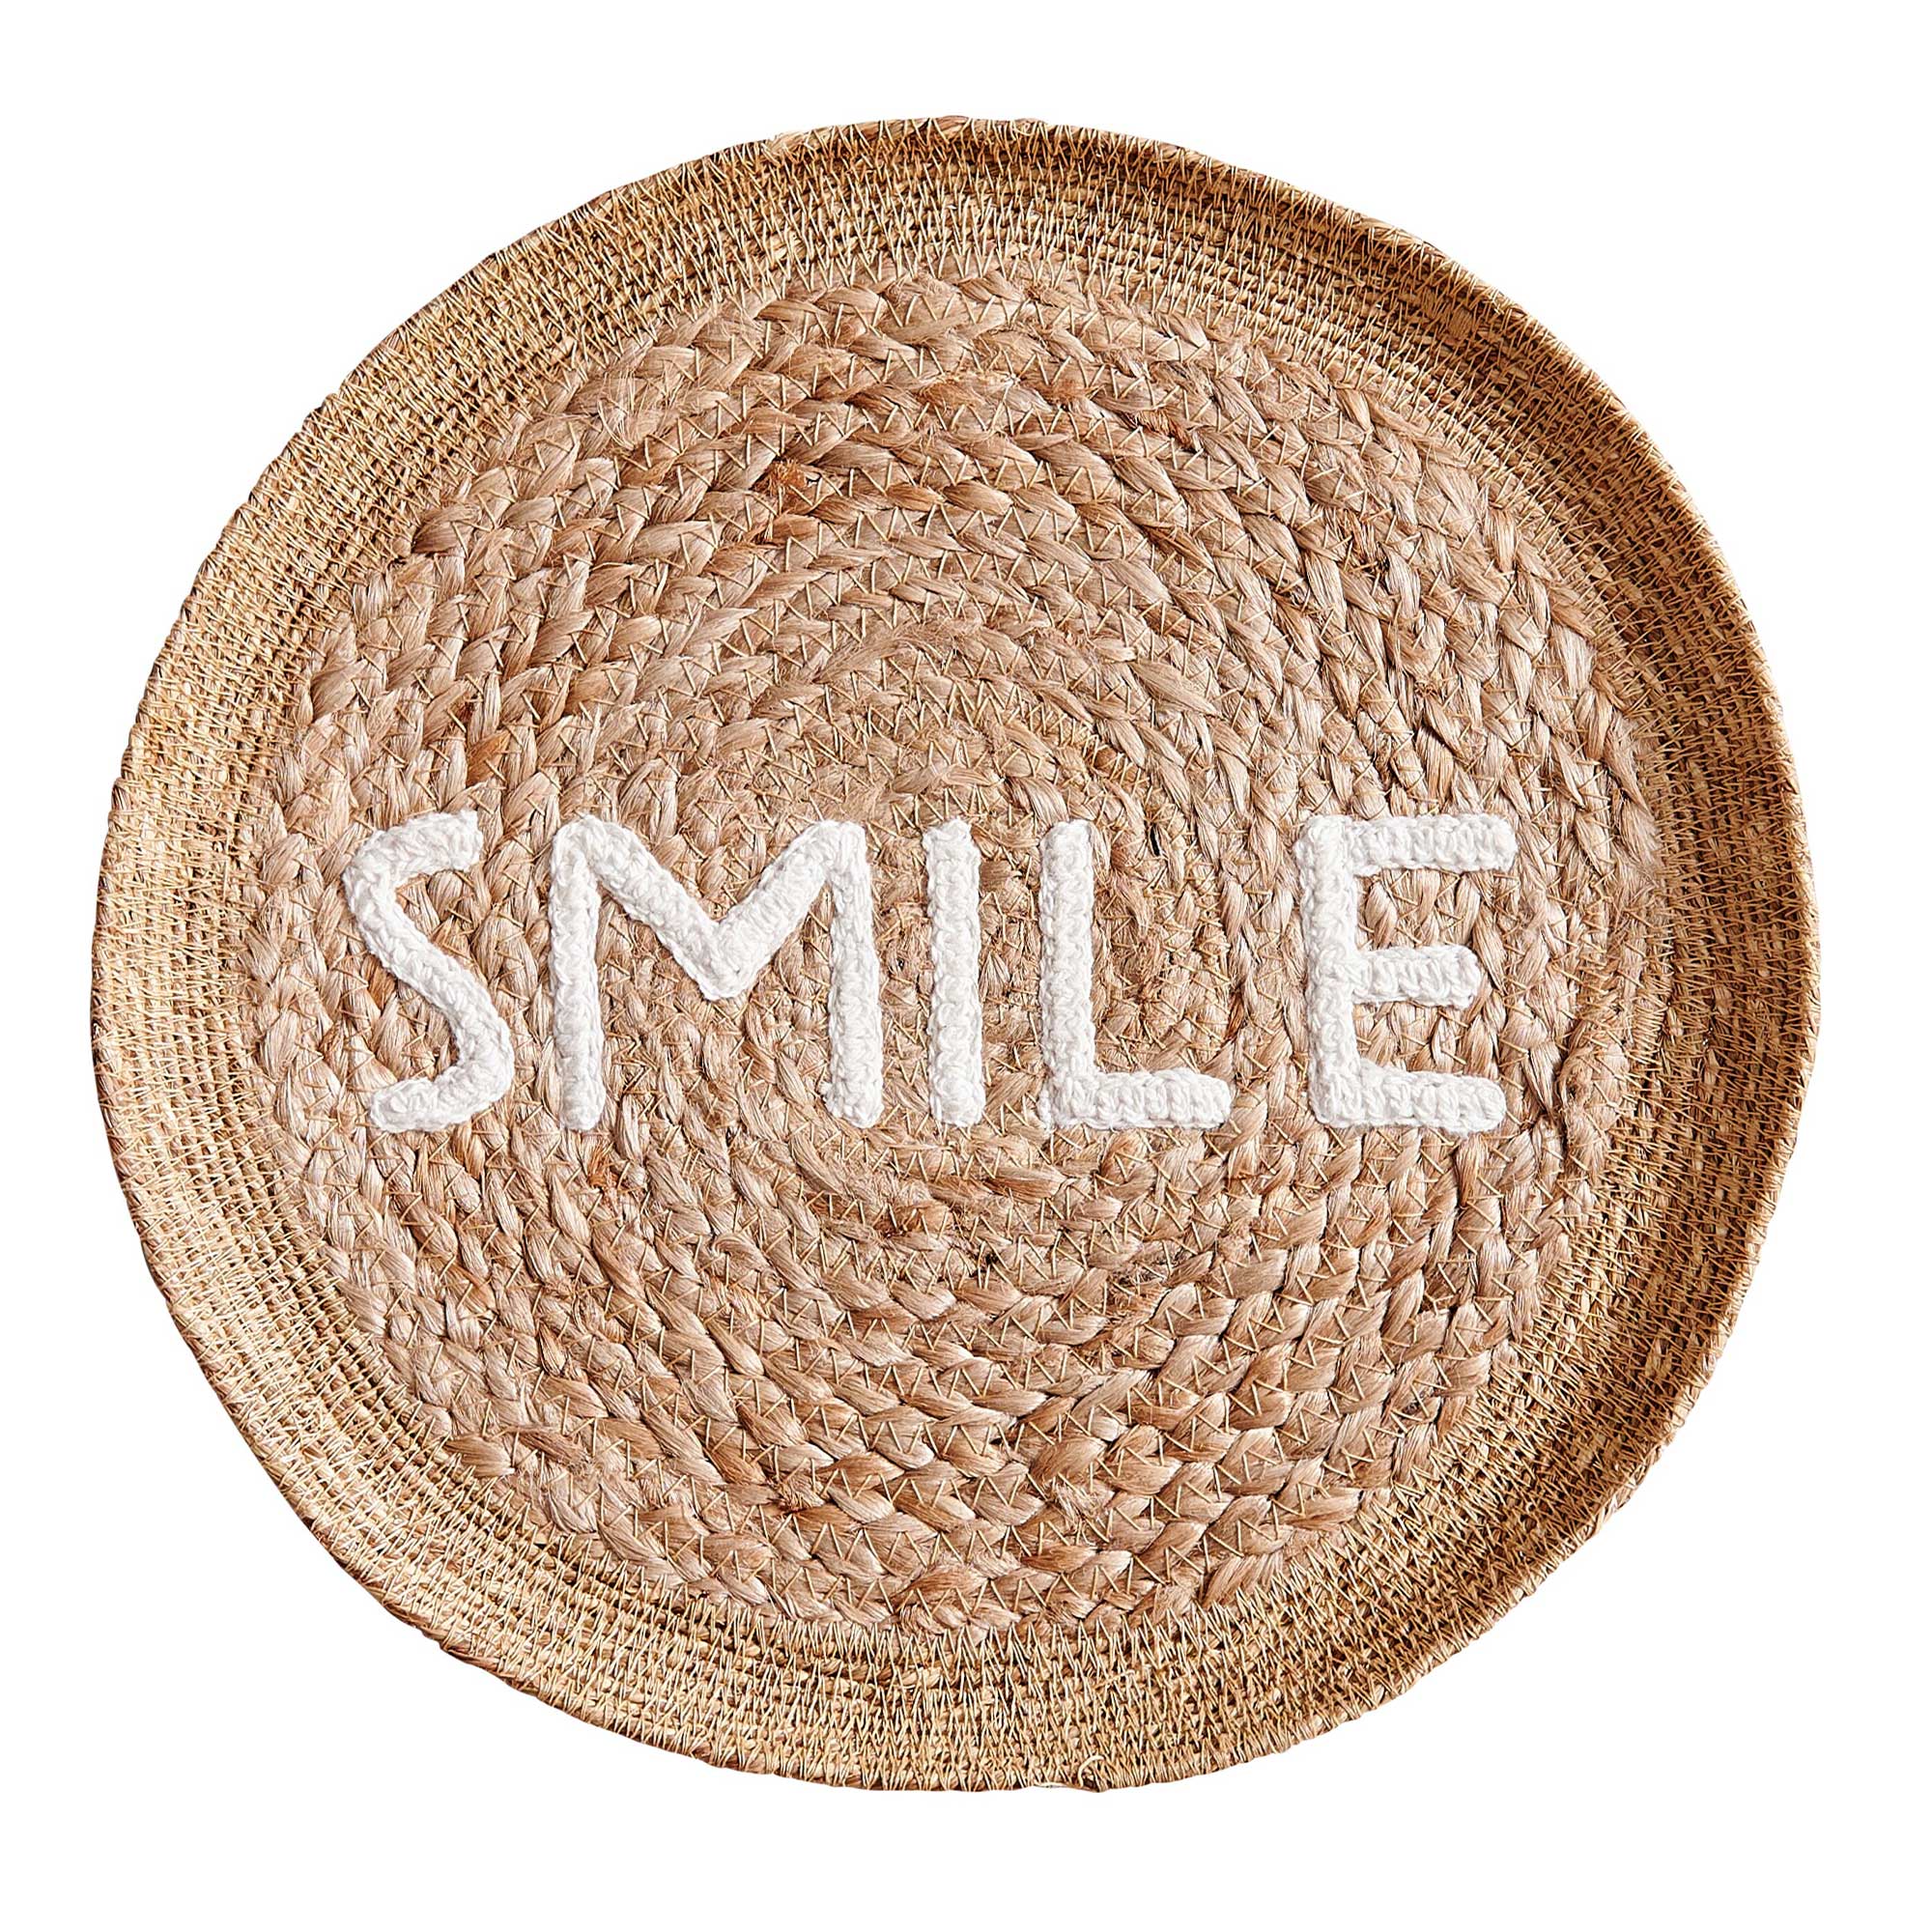 Tray "SMILE" made of wicker